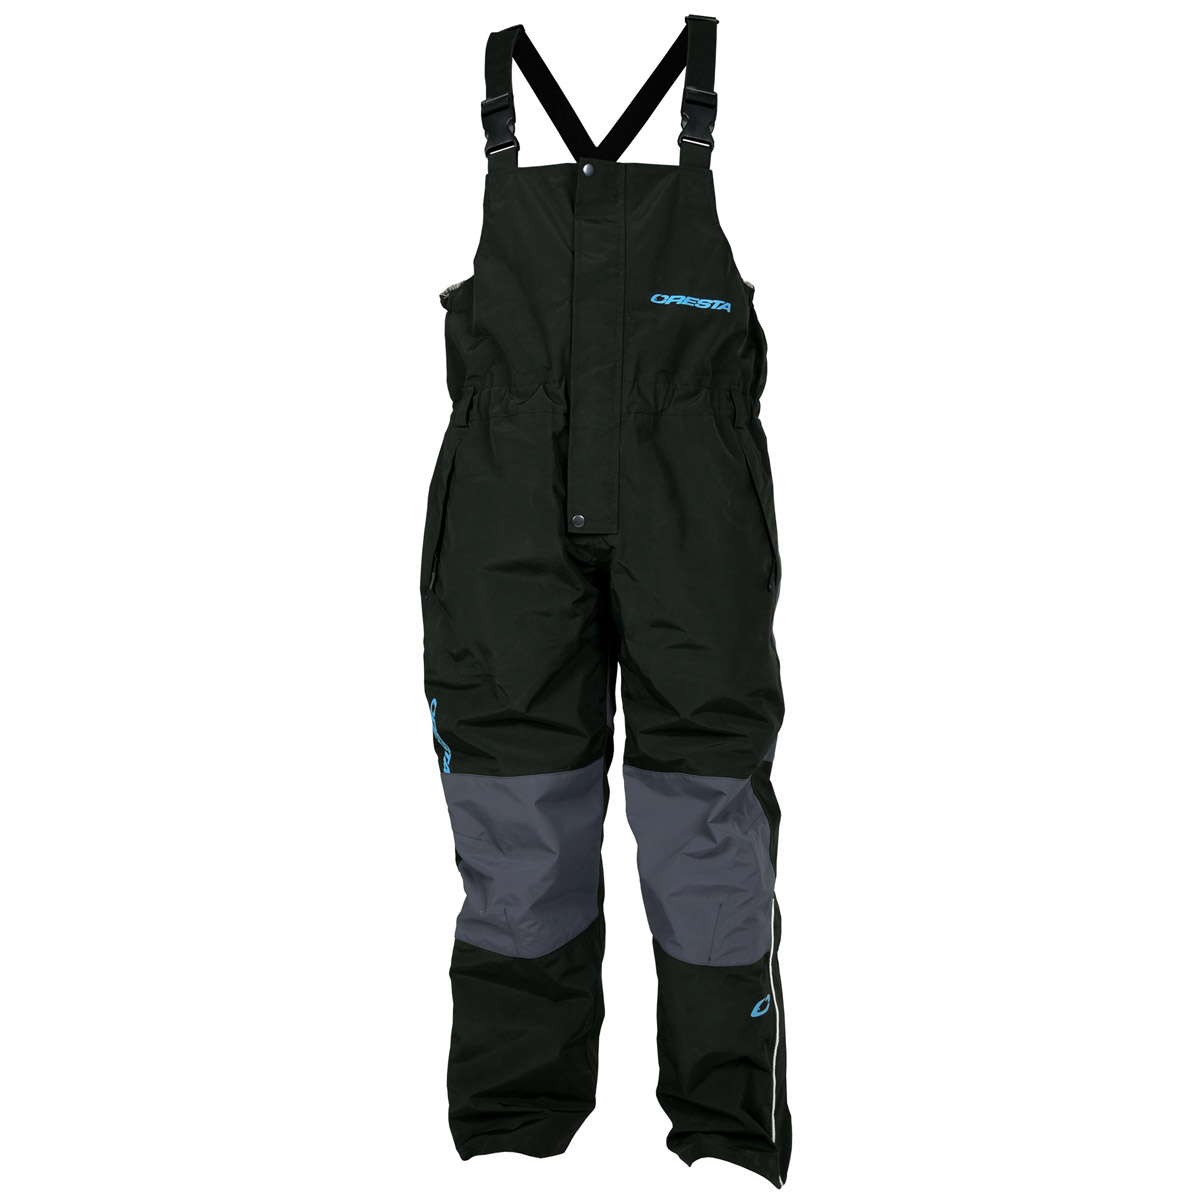 Spro Cresta All Weather Suit